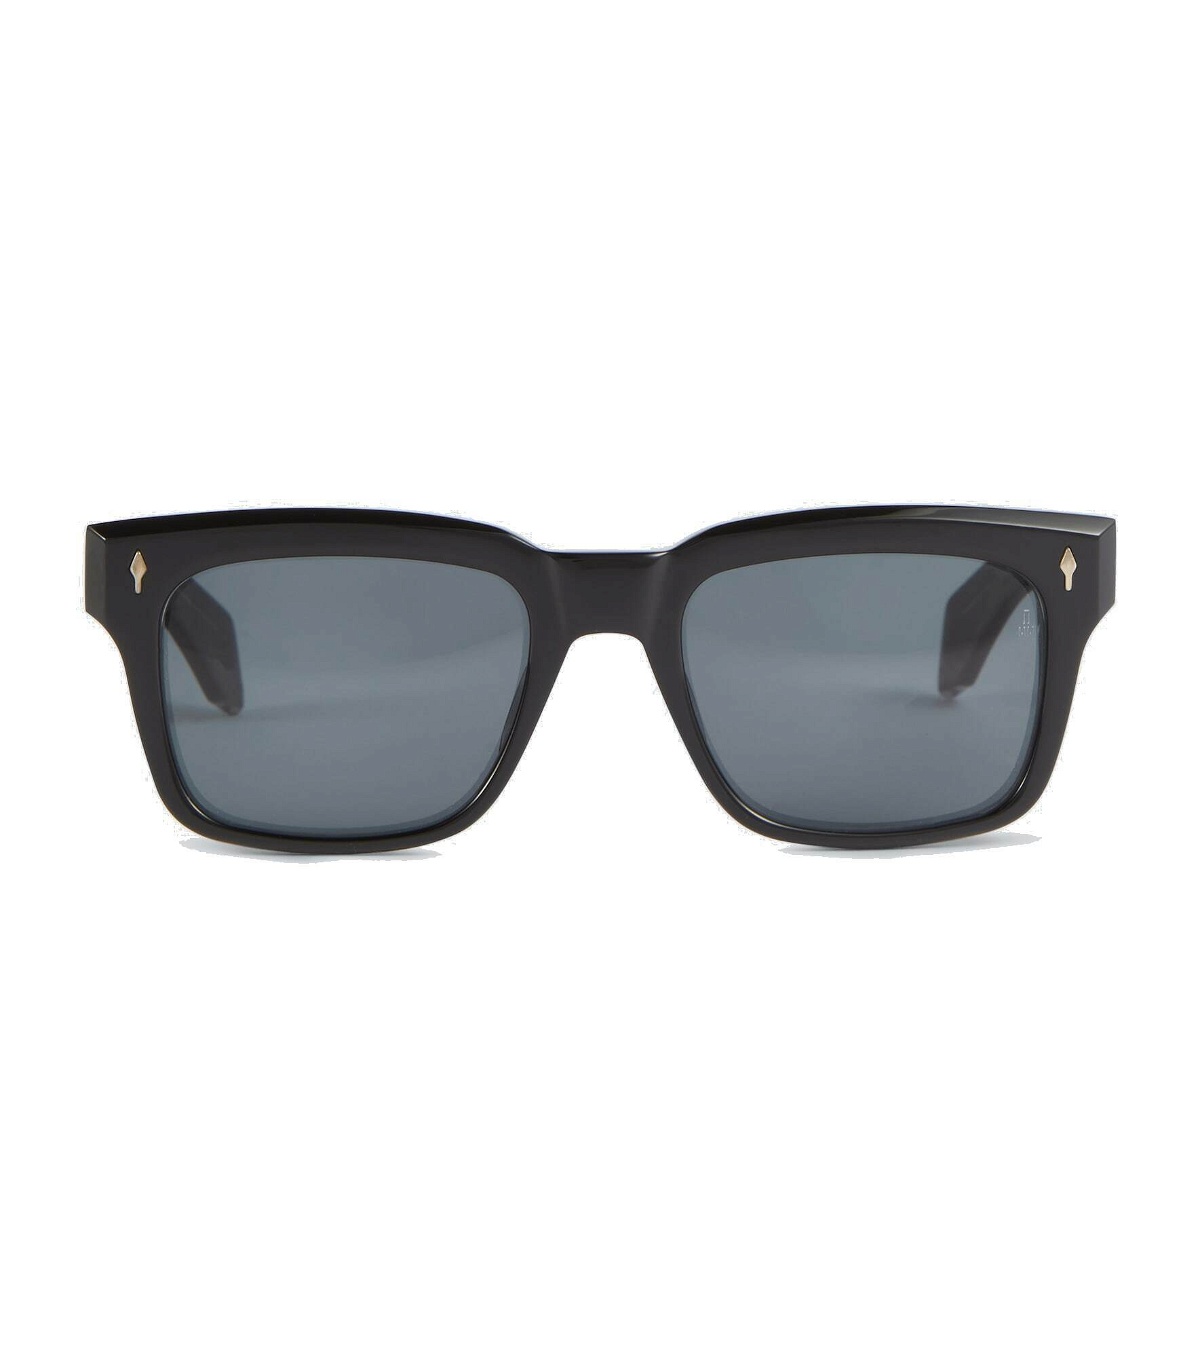 Jacques Marie Mage - Torino rectangular sunglasses Jacques Marie Mage